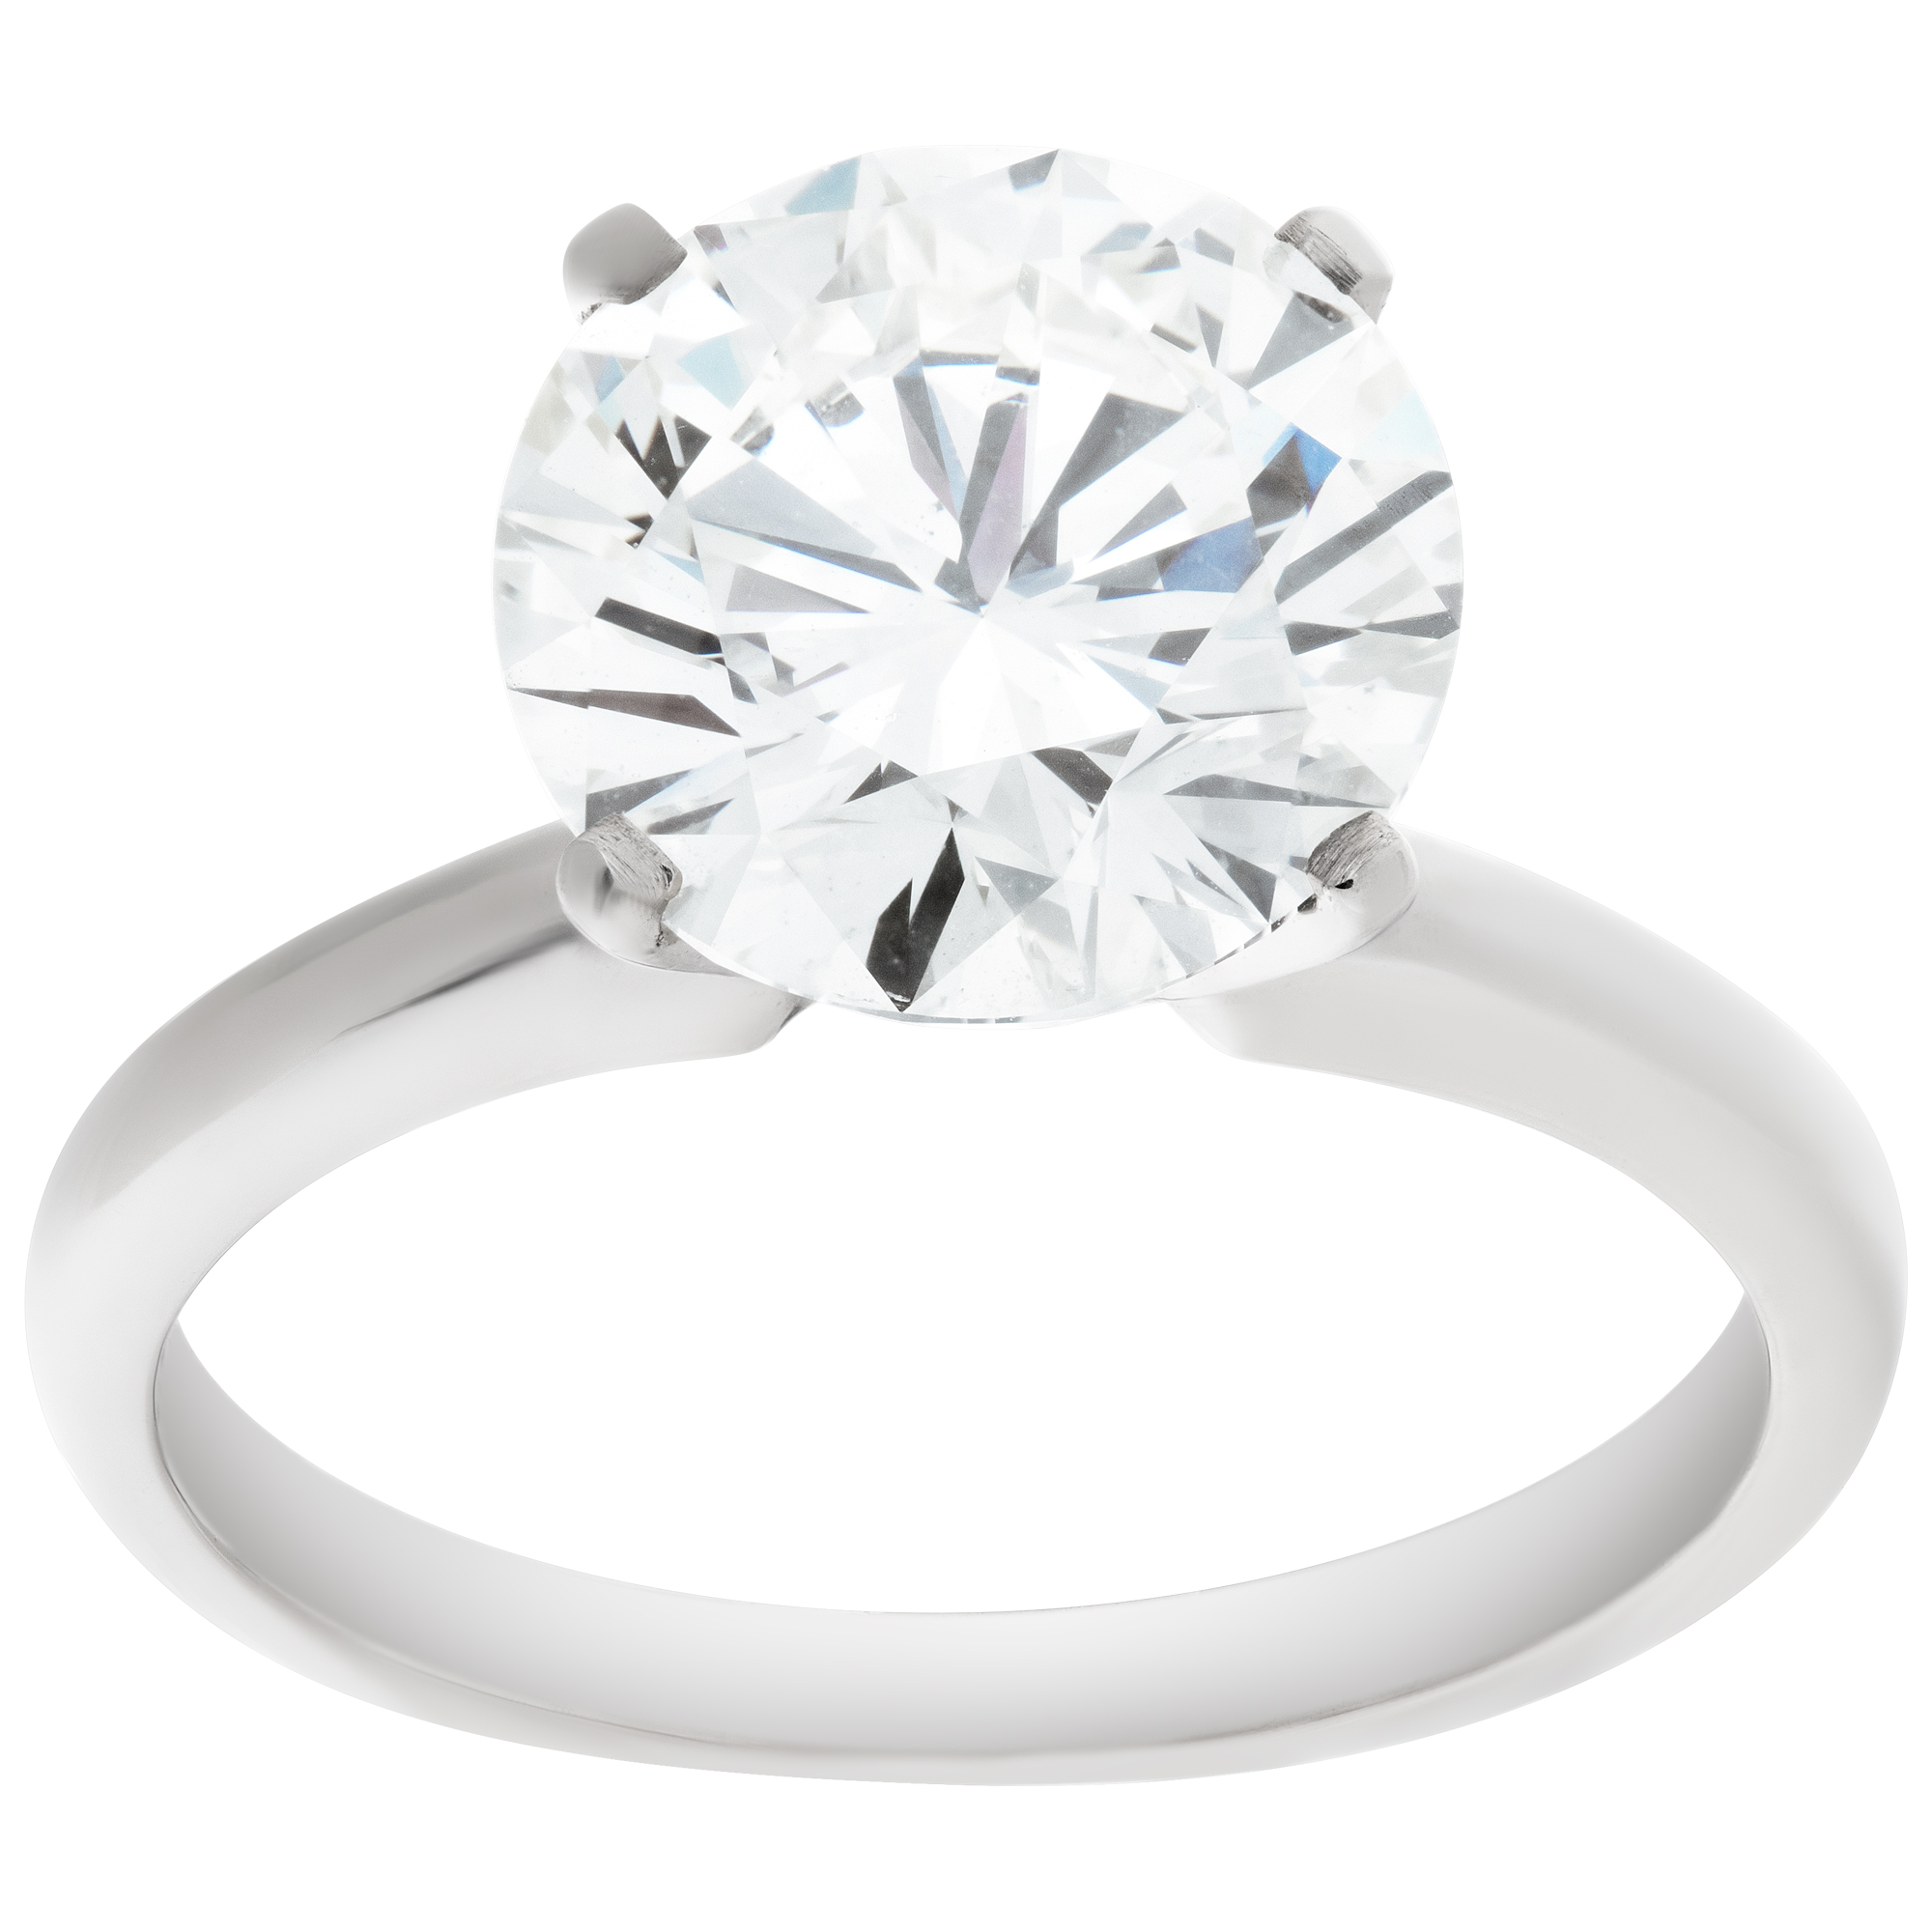 GIA certified round brilliant cut diamond 3.02 carat (L color, Internally Flawless clarity) set in platinum ring